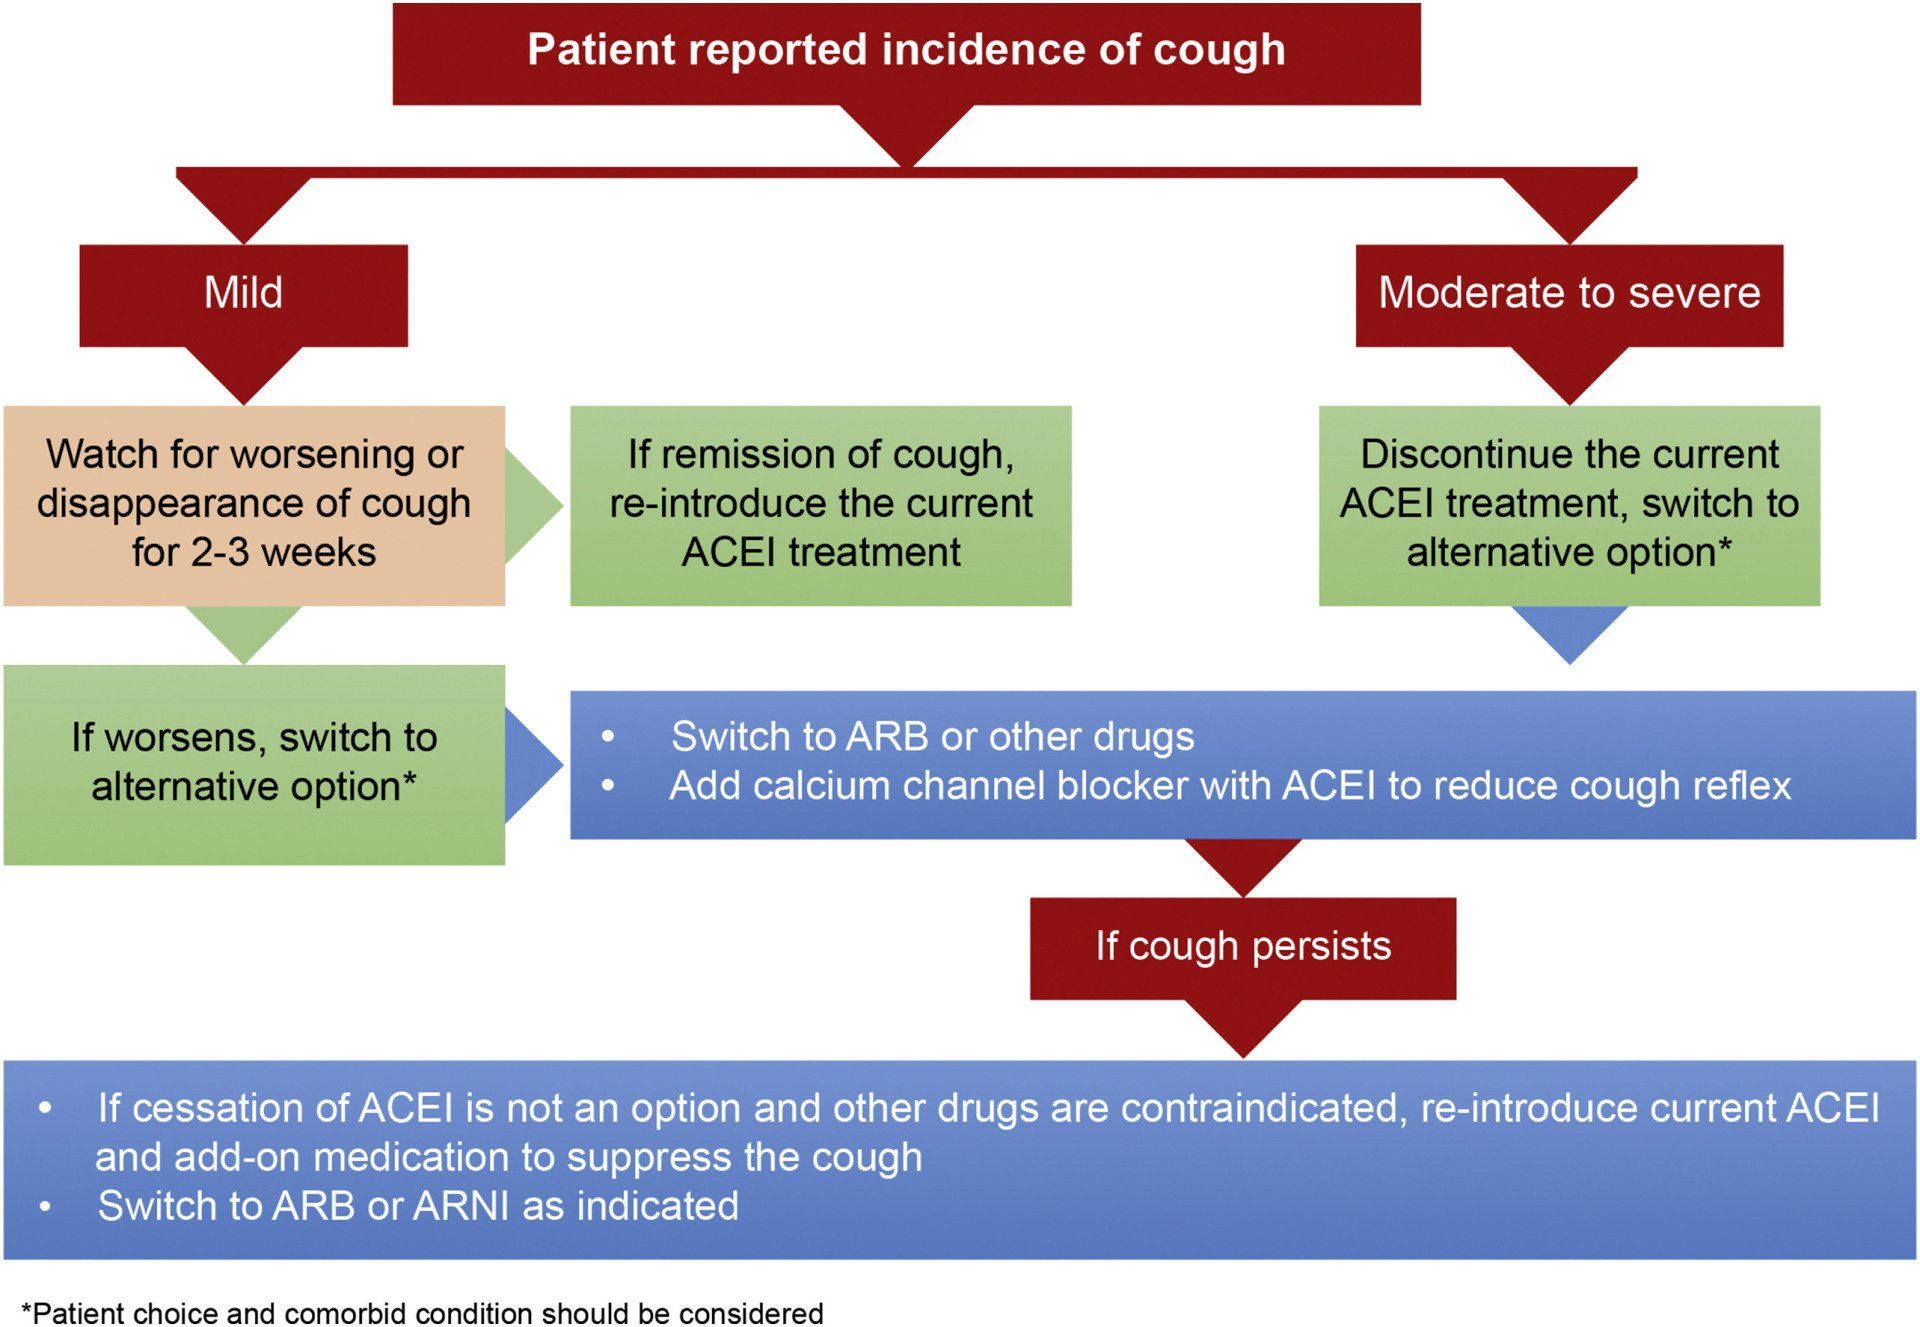 Algorithm for management of ACEI-induced cough. ACEI: Angiotensin converting enzyme inhibitor; ARB: Angiotensin II receptor blocker; ARNI:Angiotensin receptor neprilysin inhibitor.